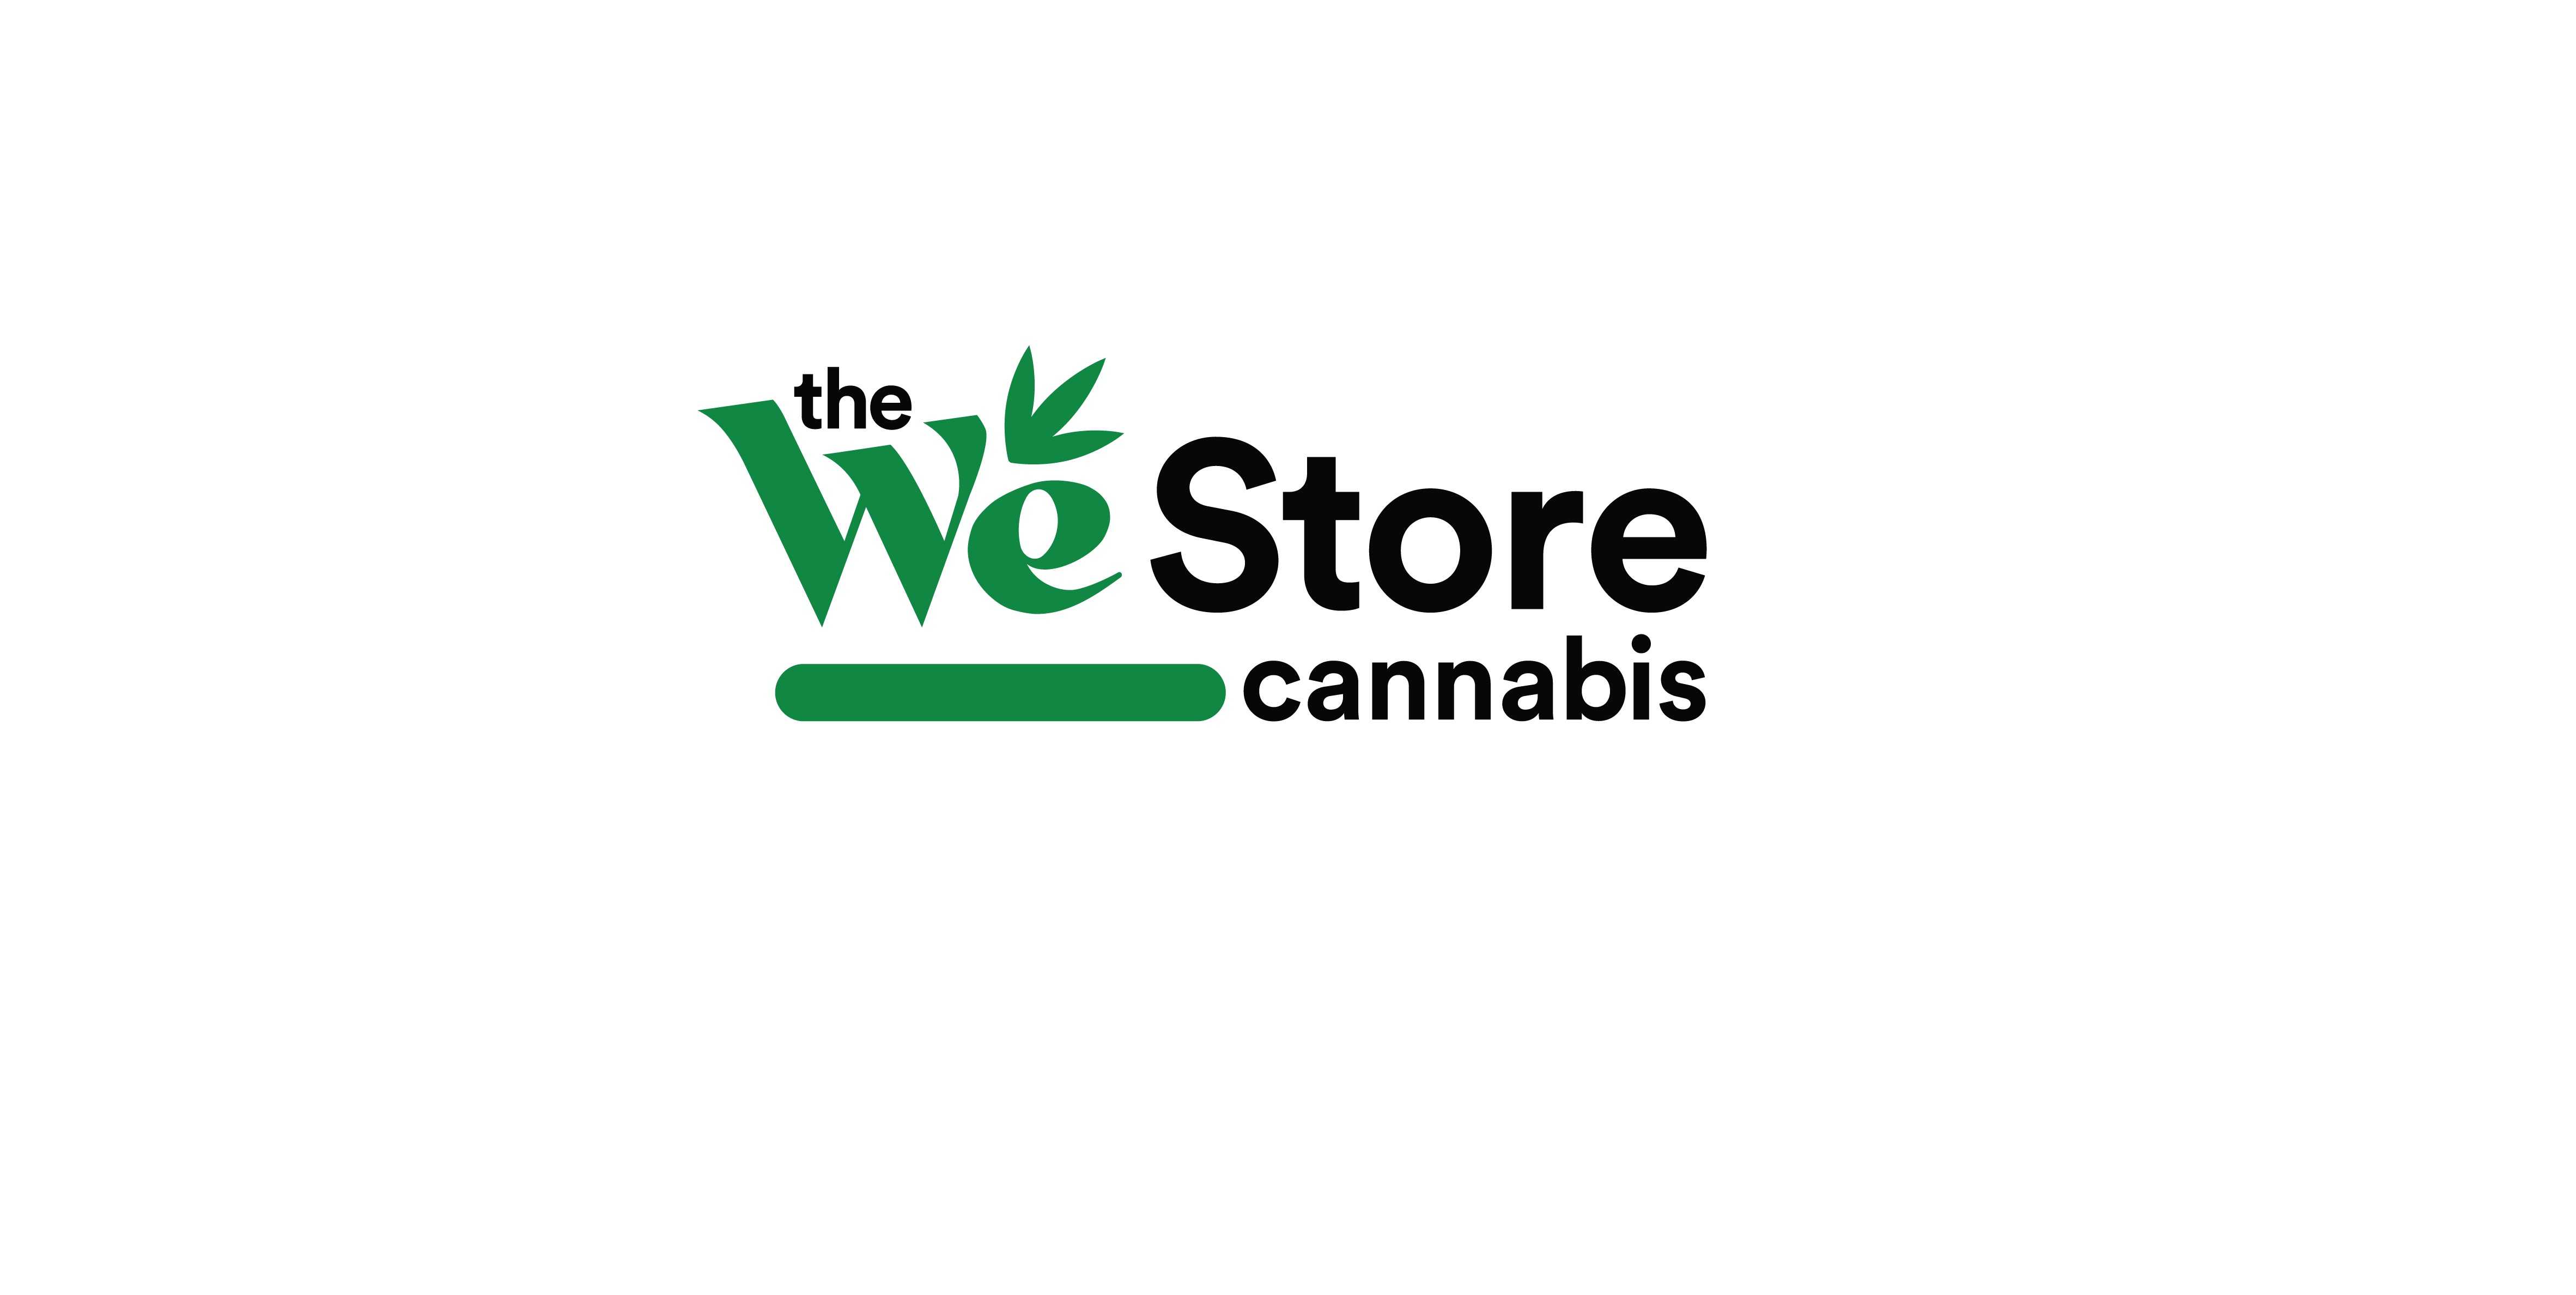 The We Store